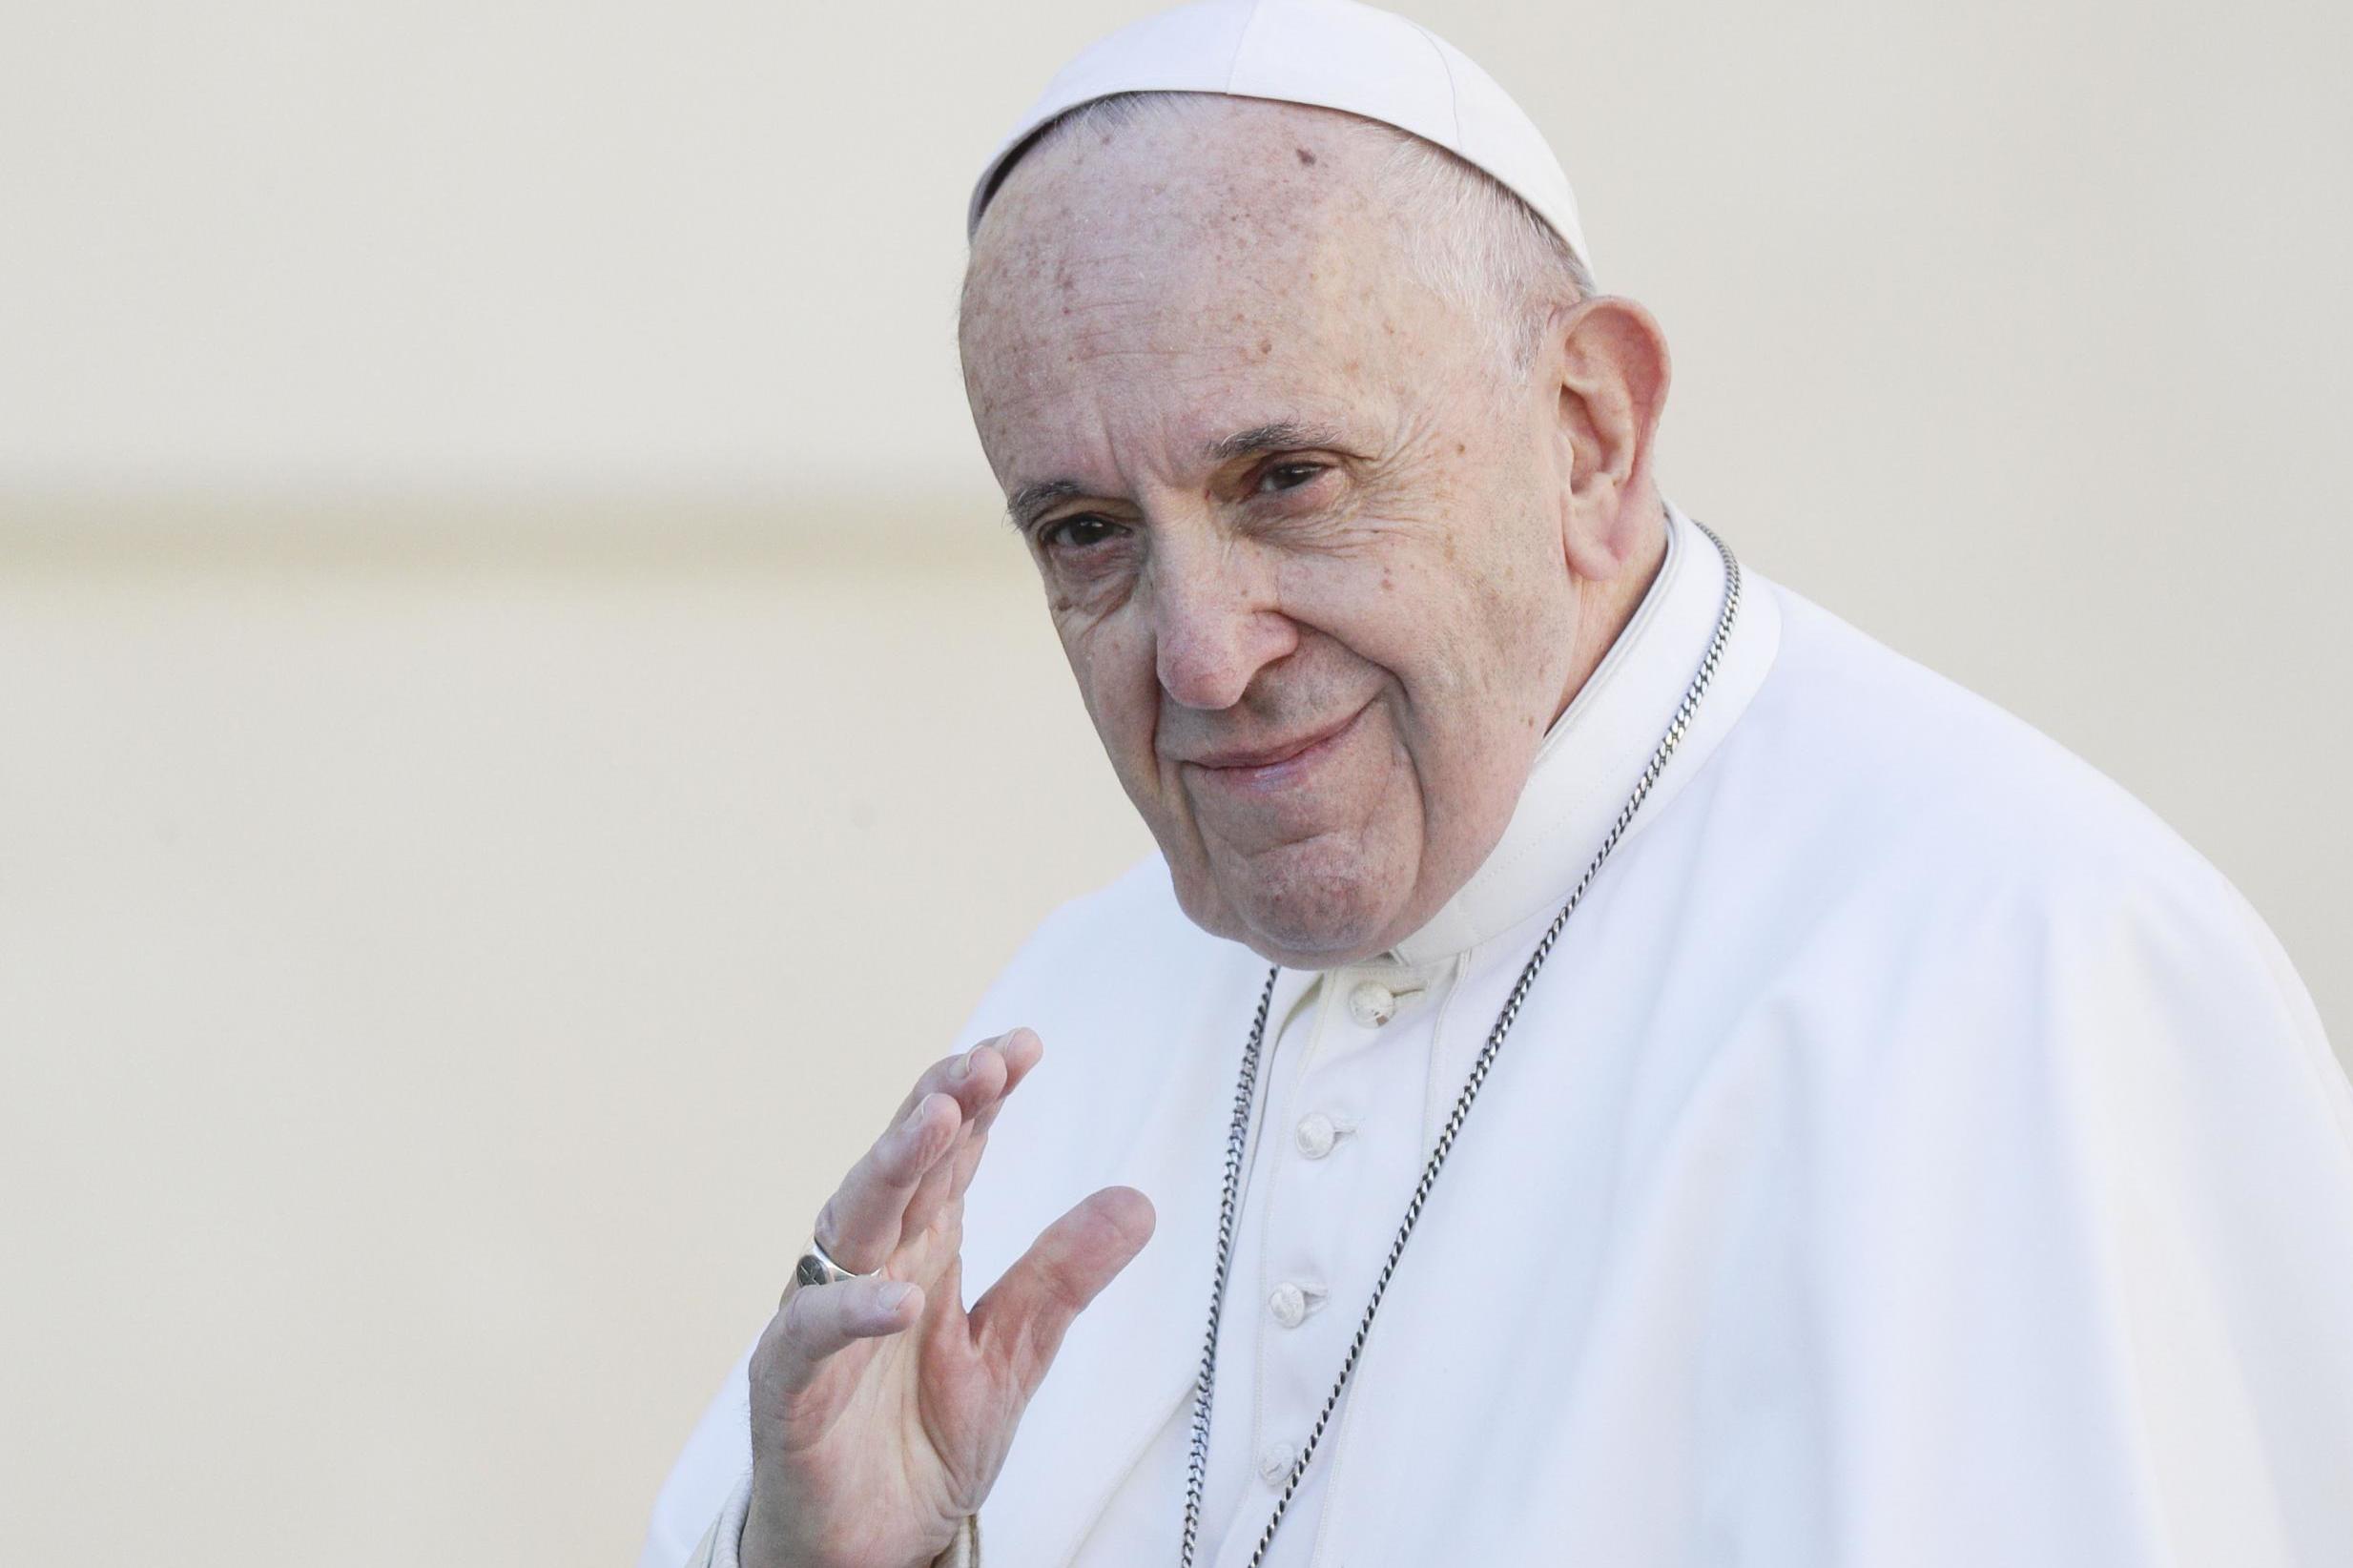 Pope Francis has previously said Catholicism should be open to gay people, despite church teachings against homosexuality